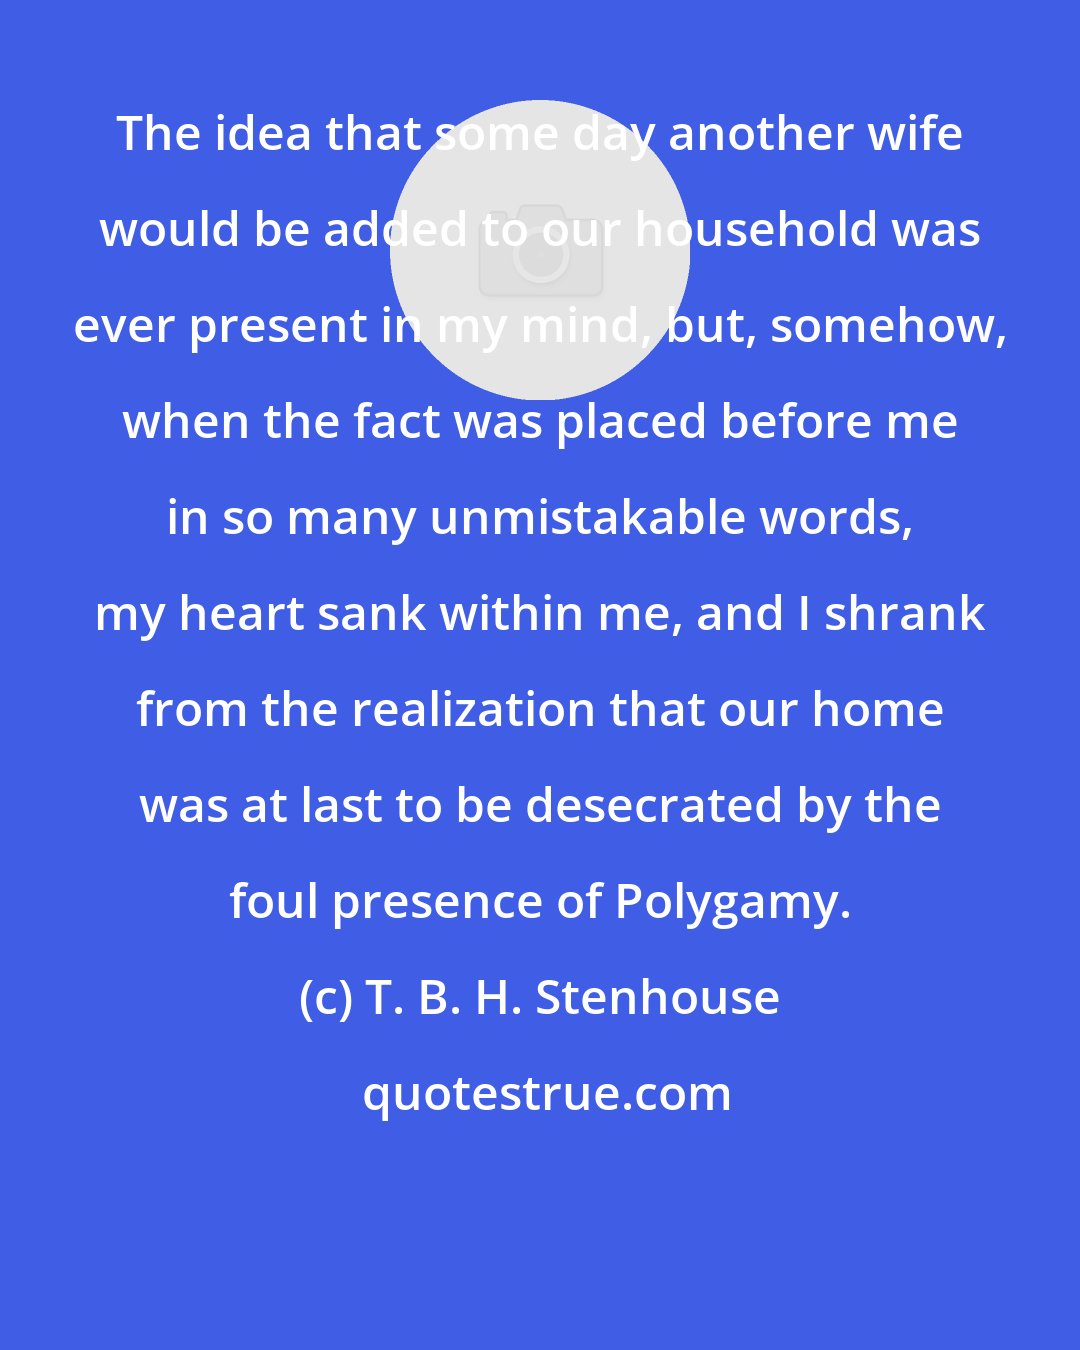 T. B. H. Stenhouse: The idea that some day another wife would be added to our household was ever present in my mind, but, somehow, when the fact was placed before me in so many unmistakable words, my heart sank within me, and I shrank from the realization that our home was at last to be desecrated by the foul presence of Polygamy.